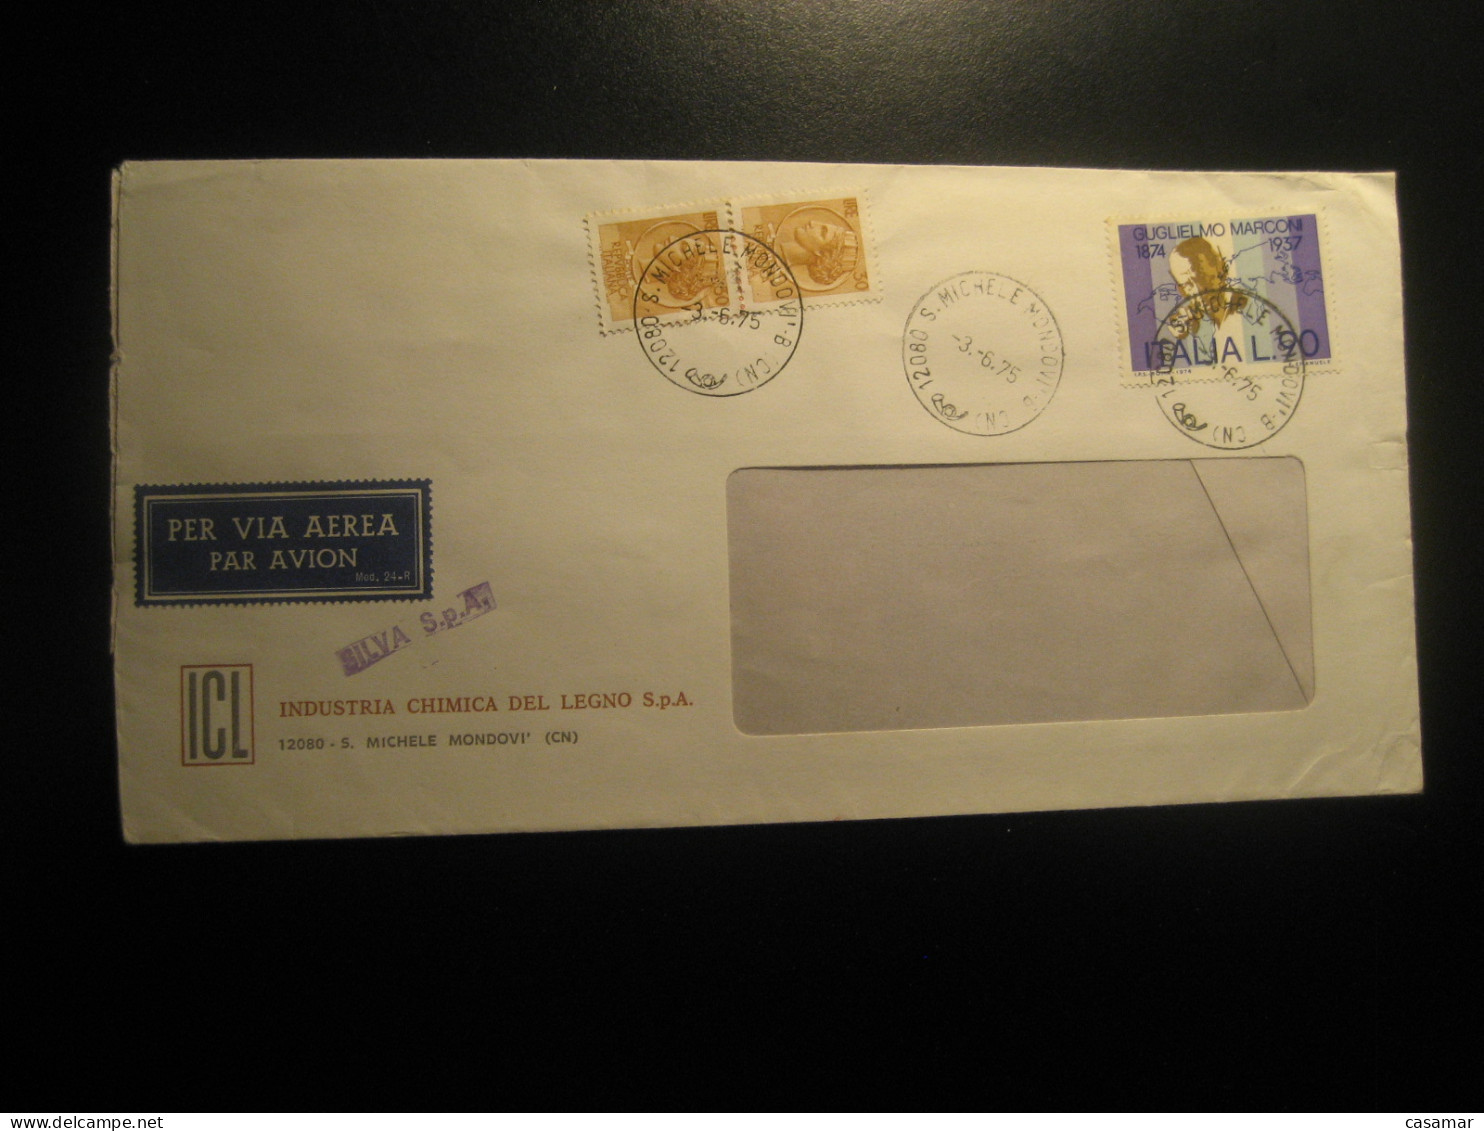 S. MICHELE MONDOVI 1975 Industria Quimica Del Legno Leather Cuir Chemical Chemistry Air Mail Cancel Cover ITALY - Química